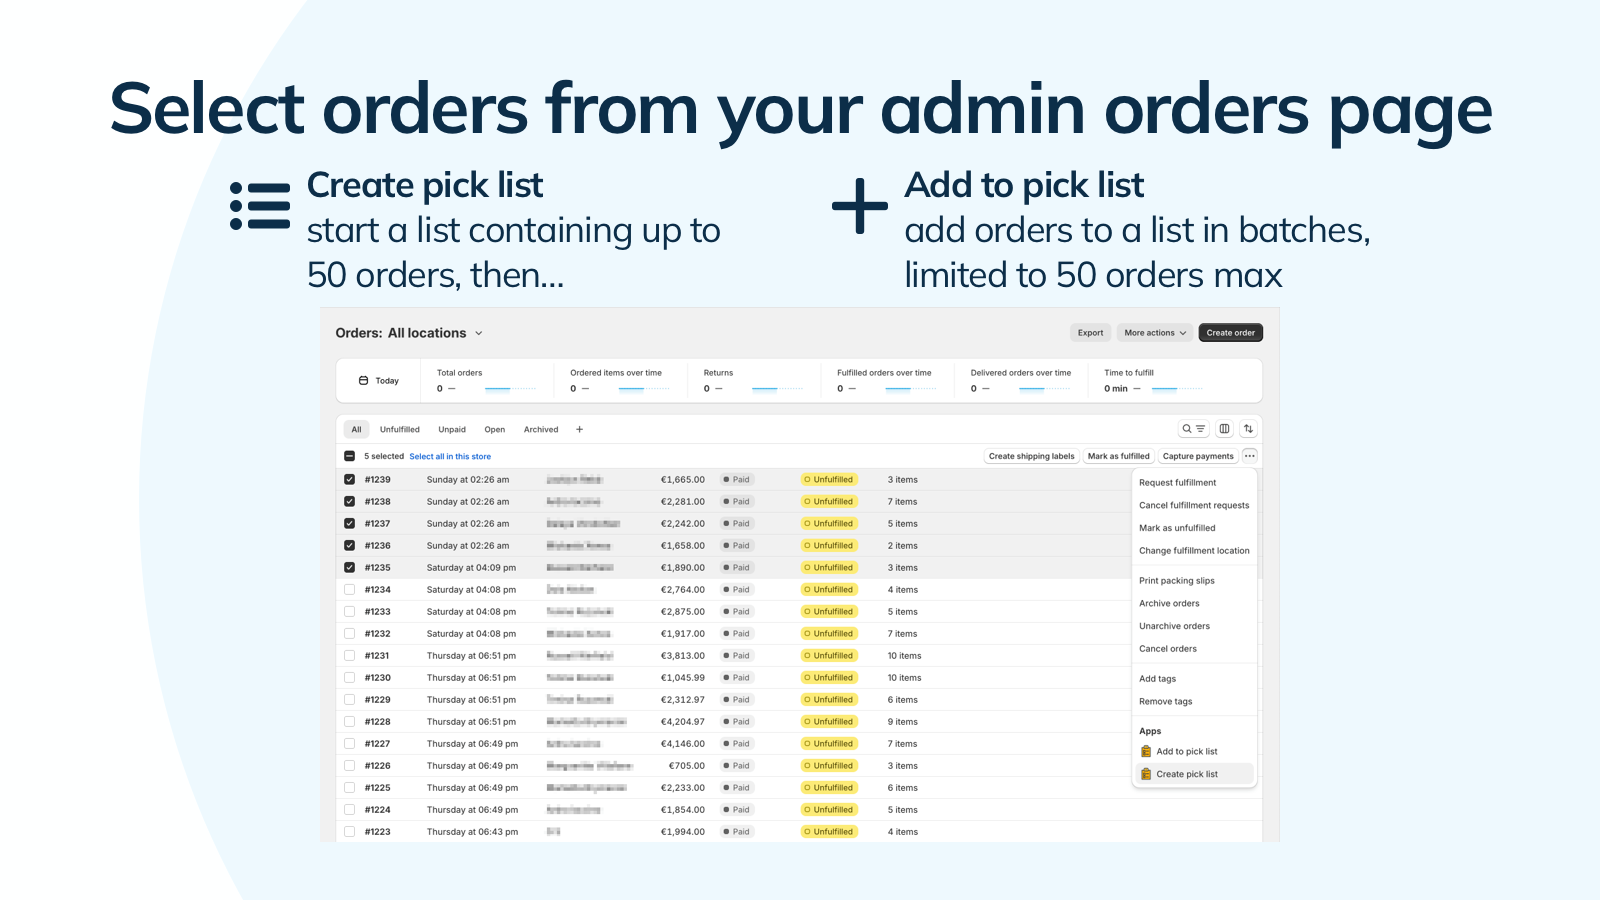 Select orders for the pick list